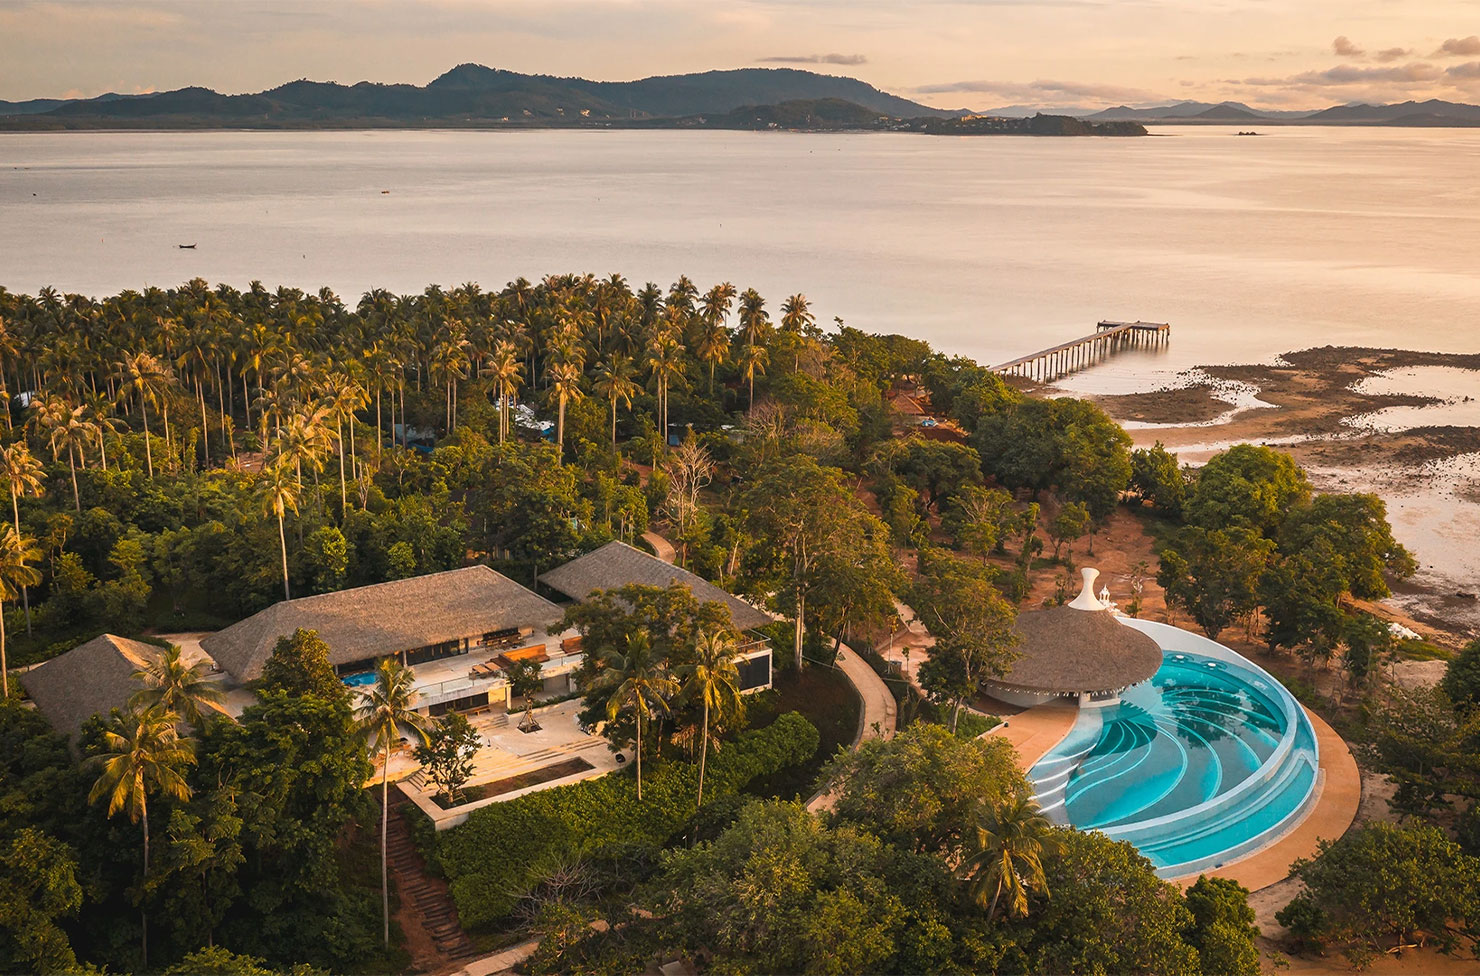 Island Escape, one of the best hotels in Phuket